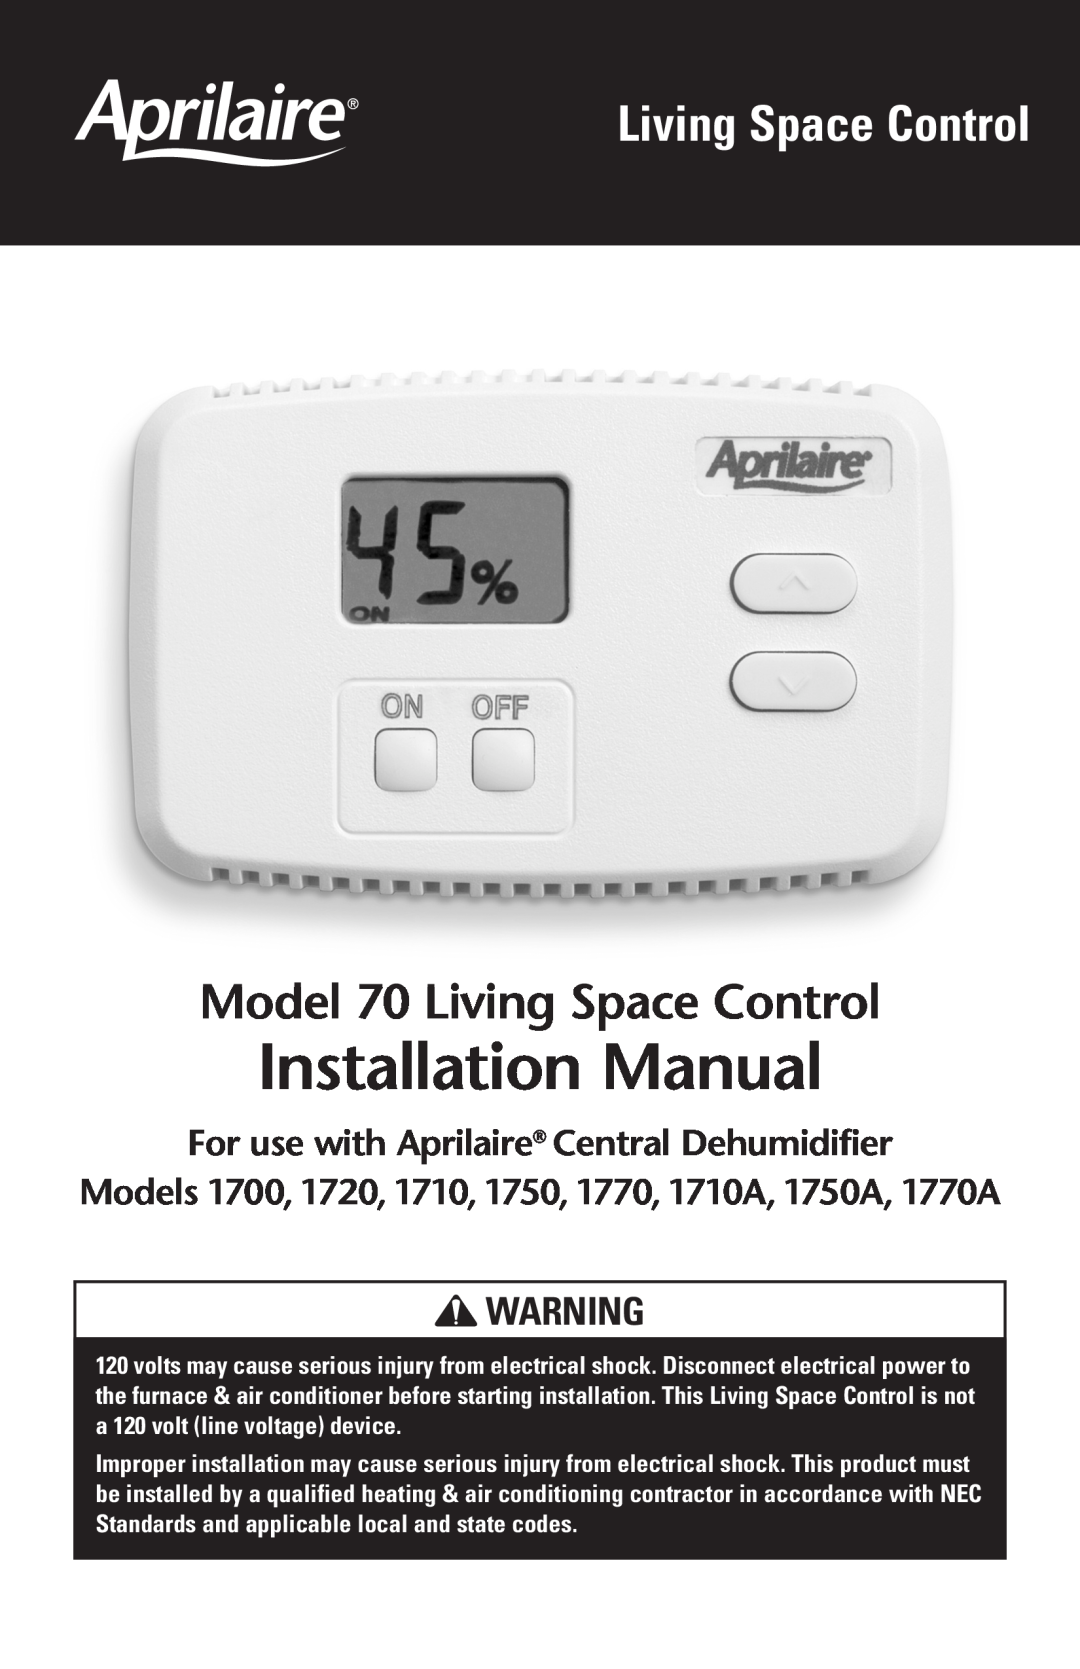 Aprilaire installation manual Installation Manual, Model 70 Living Space Control 